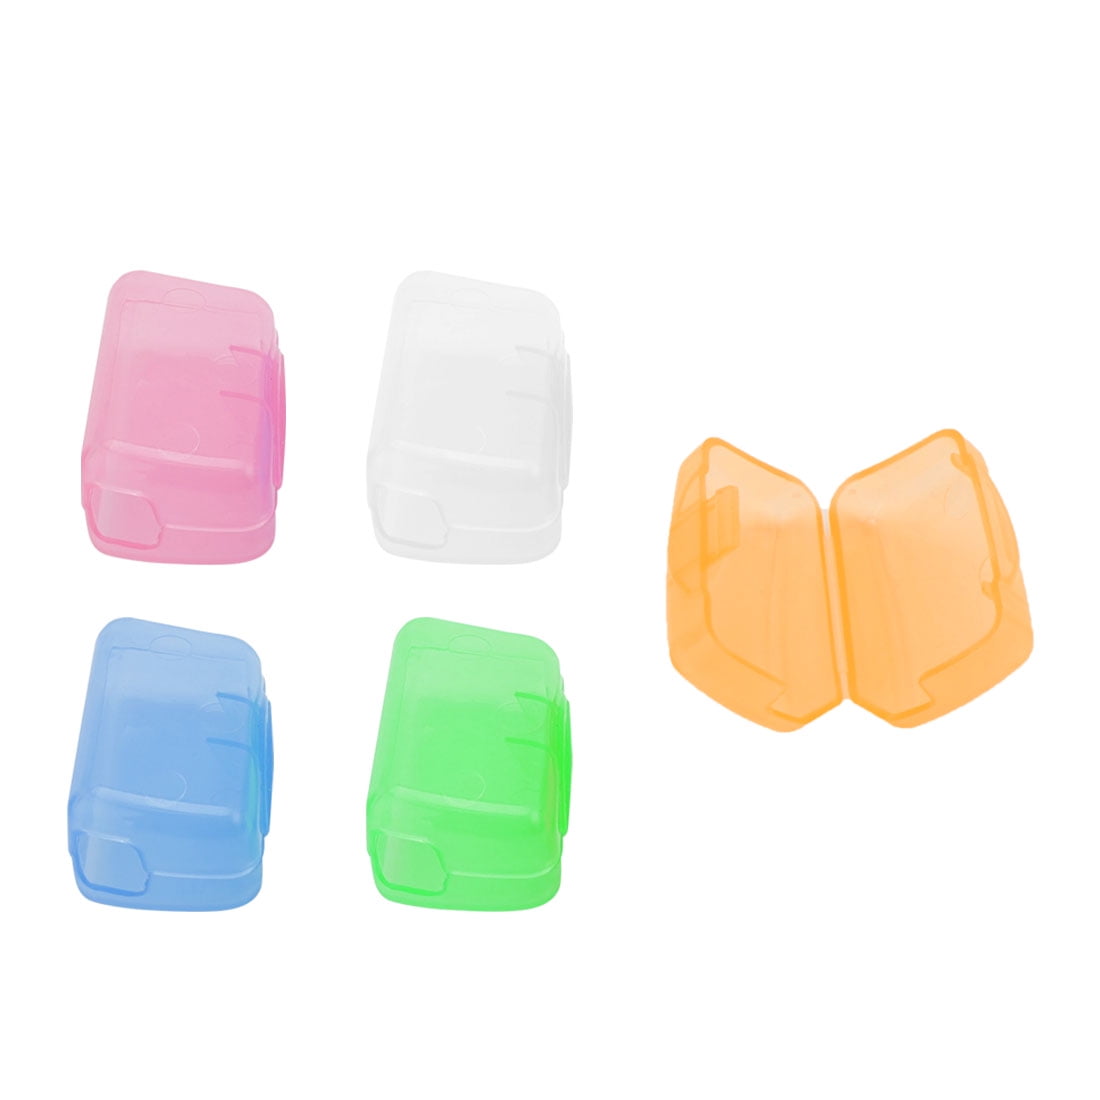 5PCS Travel Toothbrush Head Holder Protect Brush Cap Clean Box Case Cover 